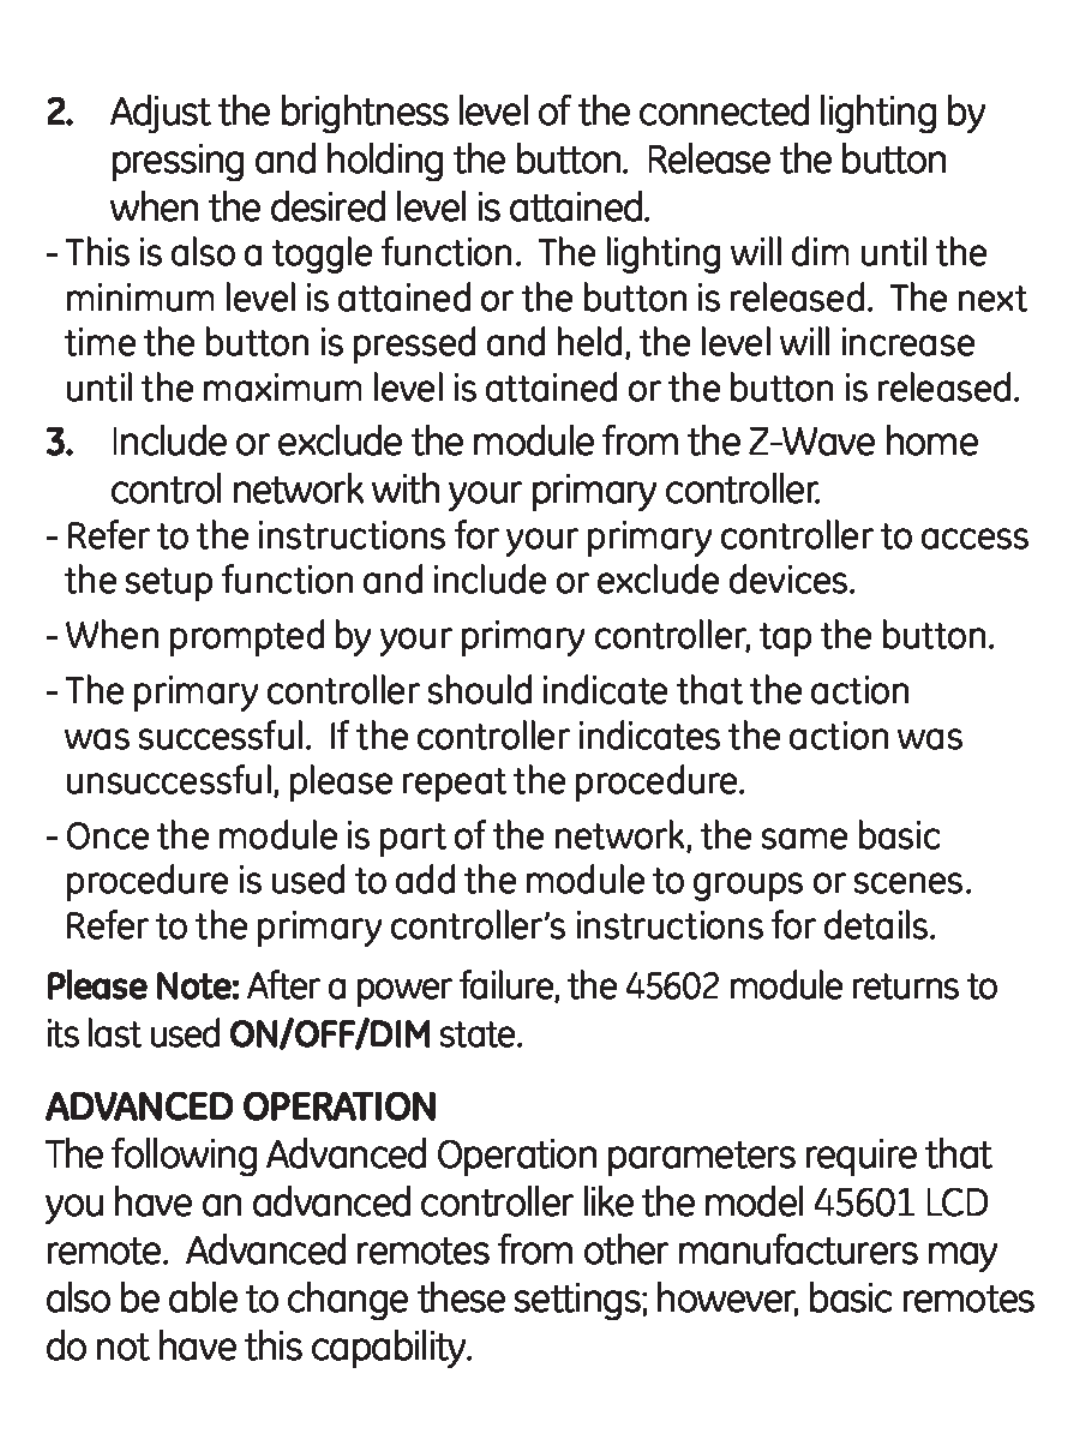 GE 45602 manual Advanced Operation, when the desired level is attained, control network with your primary controller 